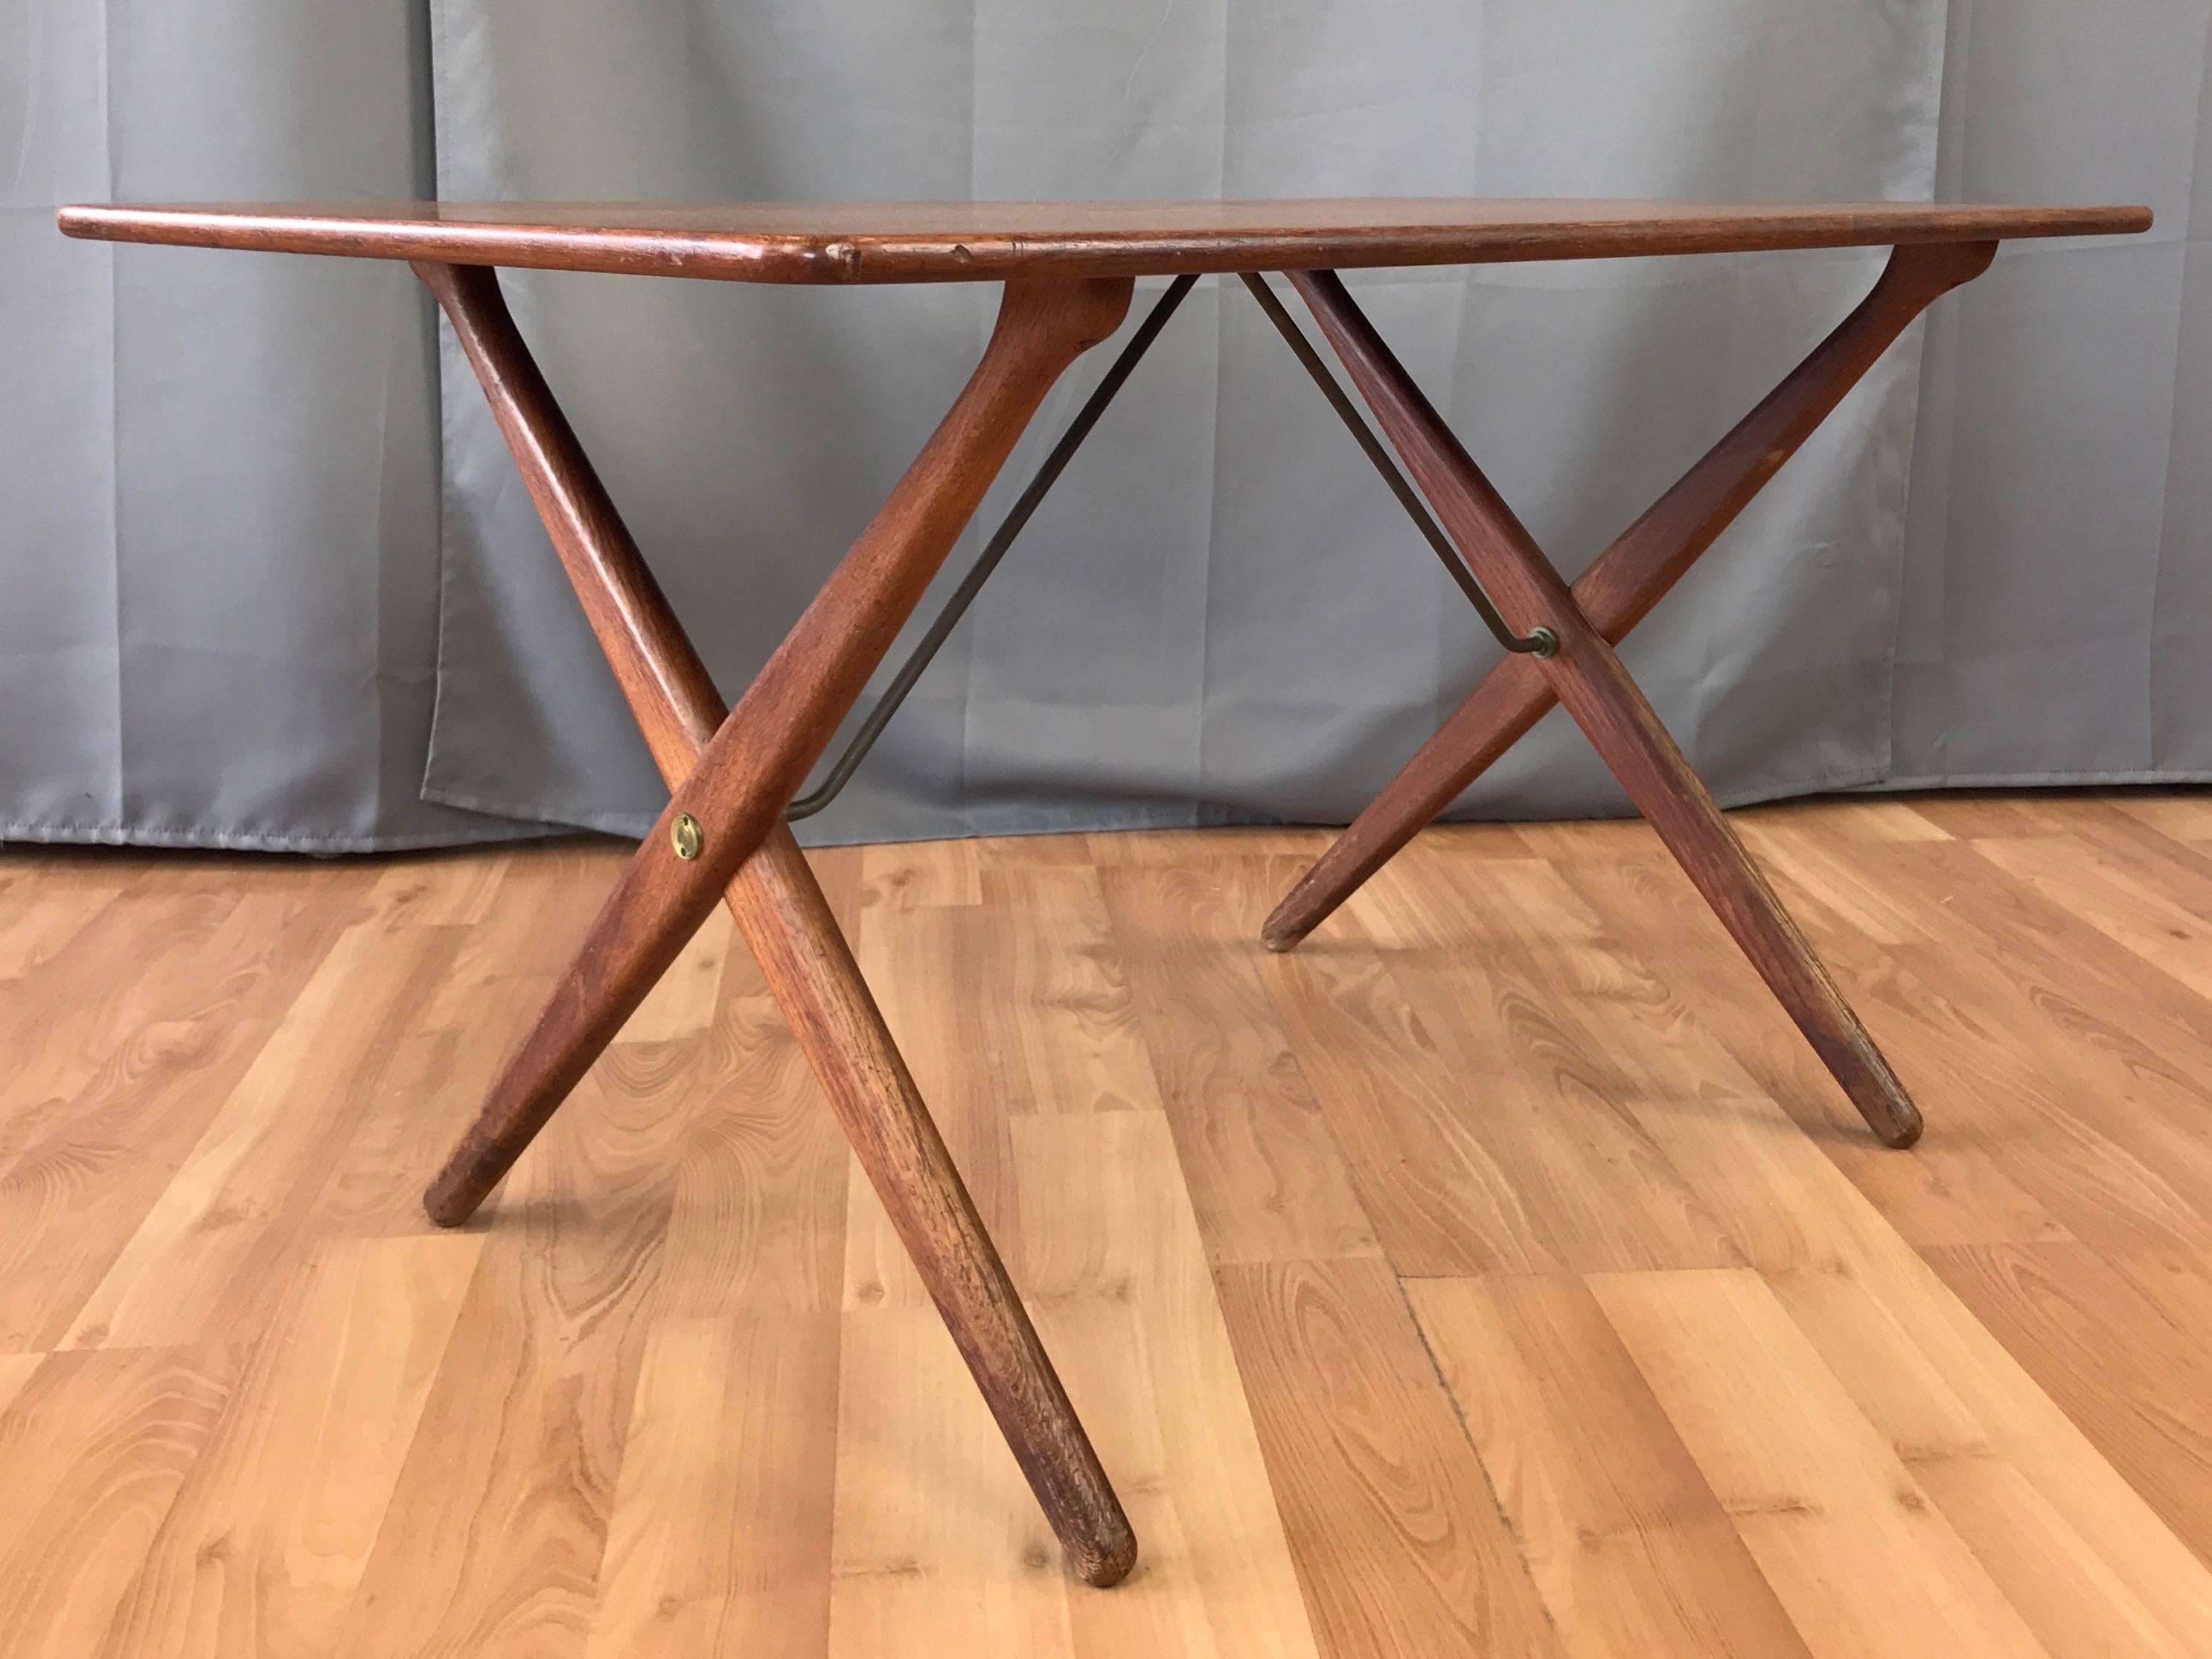 A model AT-308 all teak coffee or cocktail table by Hans J. Wegner for Andreas Tuck. 

Designed in 1955, this table is typically found with a teak top and oak base, which makes this all teak example quite uncommon. Distinguished by an elegant pair